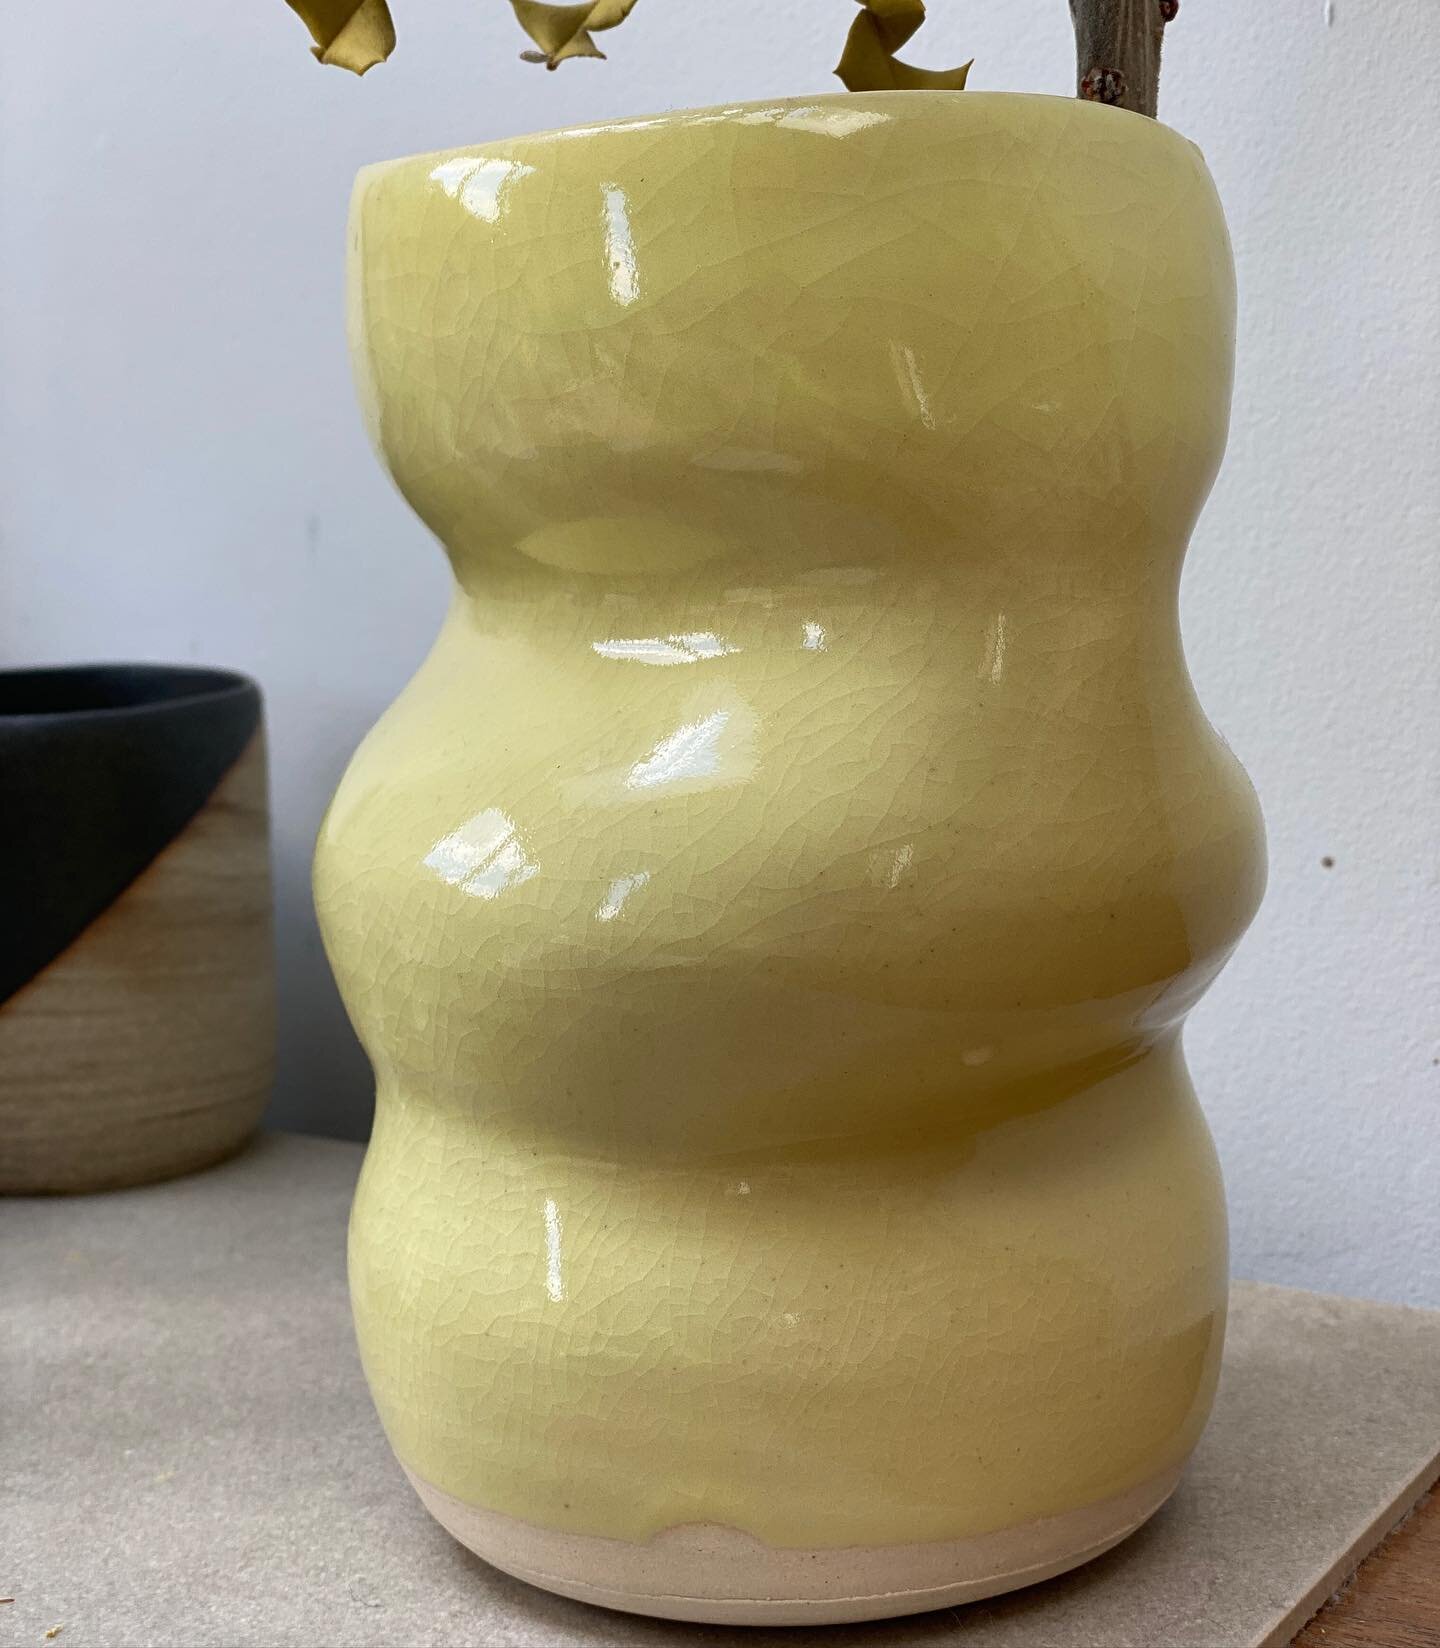 *New work*. Remember the wiggle vase from a few posts before? Well, here she is all covered in glaze. &lsquo;Catch me I&rsquo;m crumpling&rsquo; in lemon. 💛 Remember to follow @womenwillcreate and tune in for tomorrow&rsquo;s virtual market.